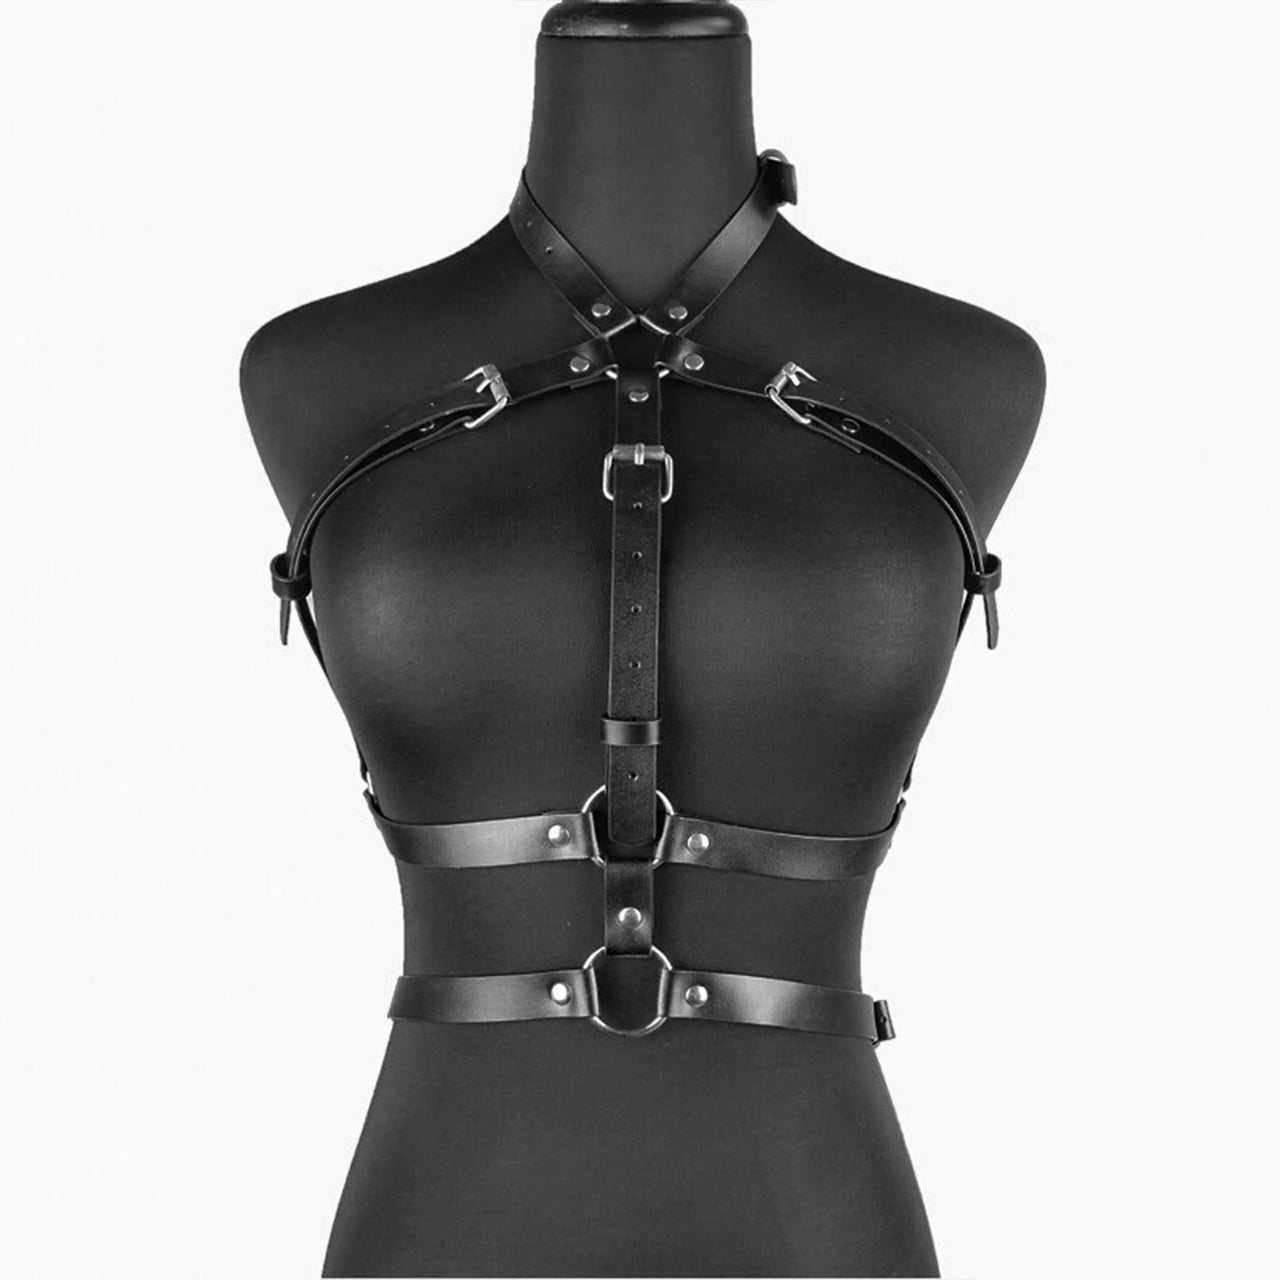 Faux leather adjustable body harness